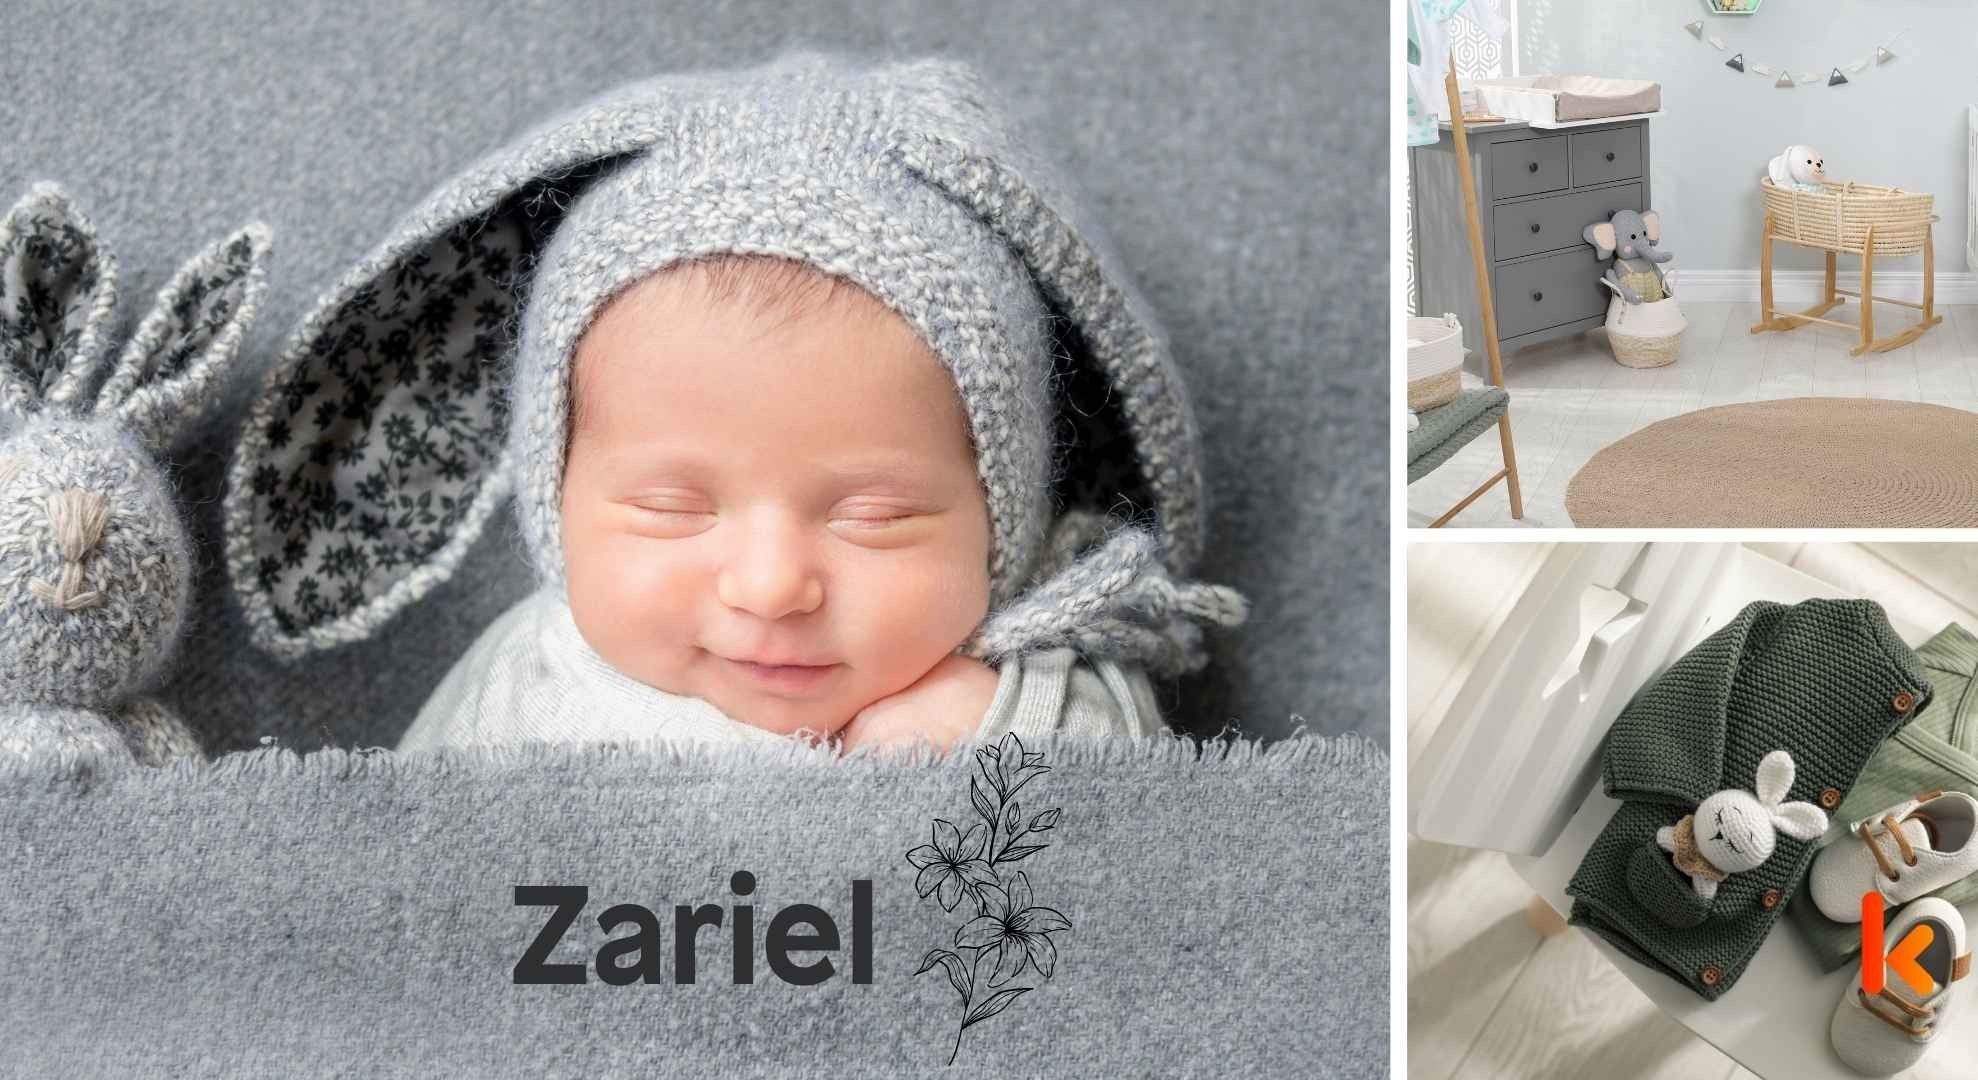 Meaning of the name Zariel